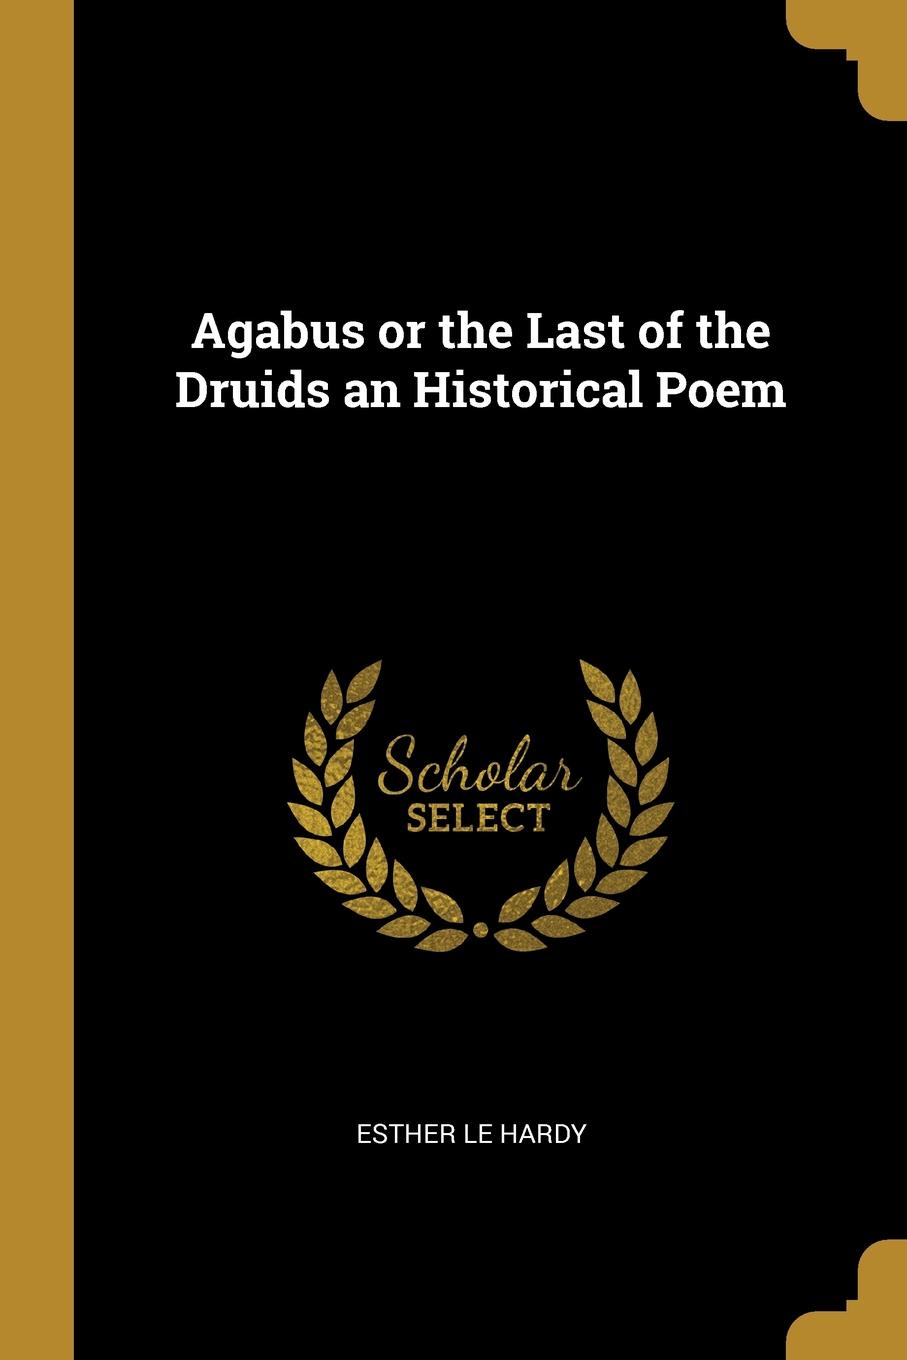 Agabus or the Last of the Druids an Historical Poem